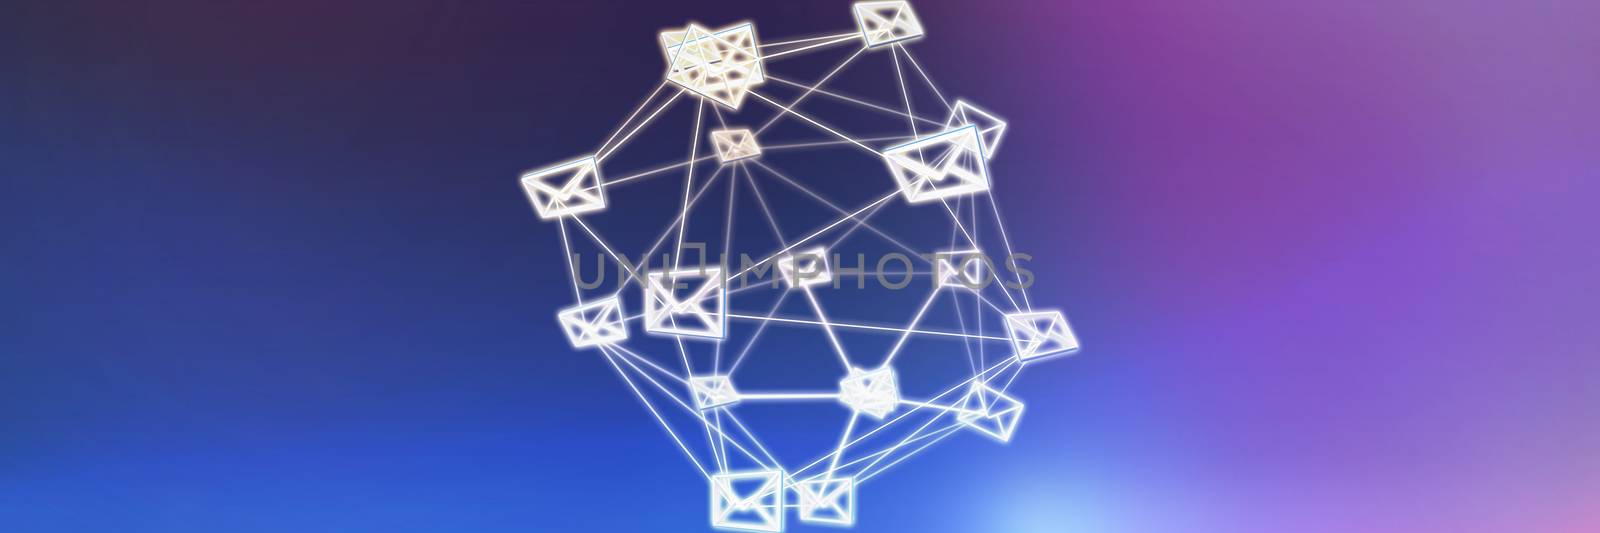 Abstract image of message icons against abstract blue background